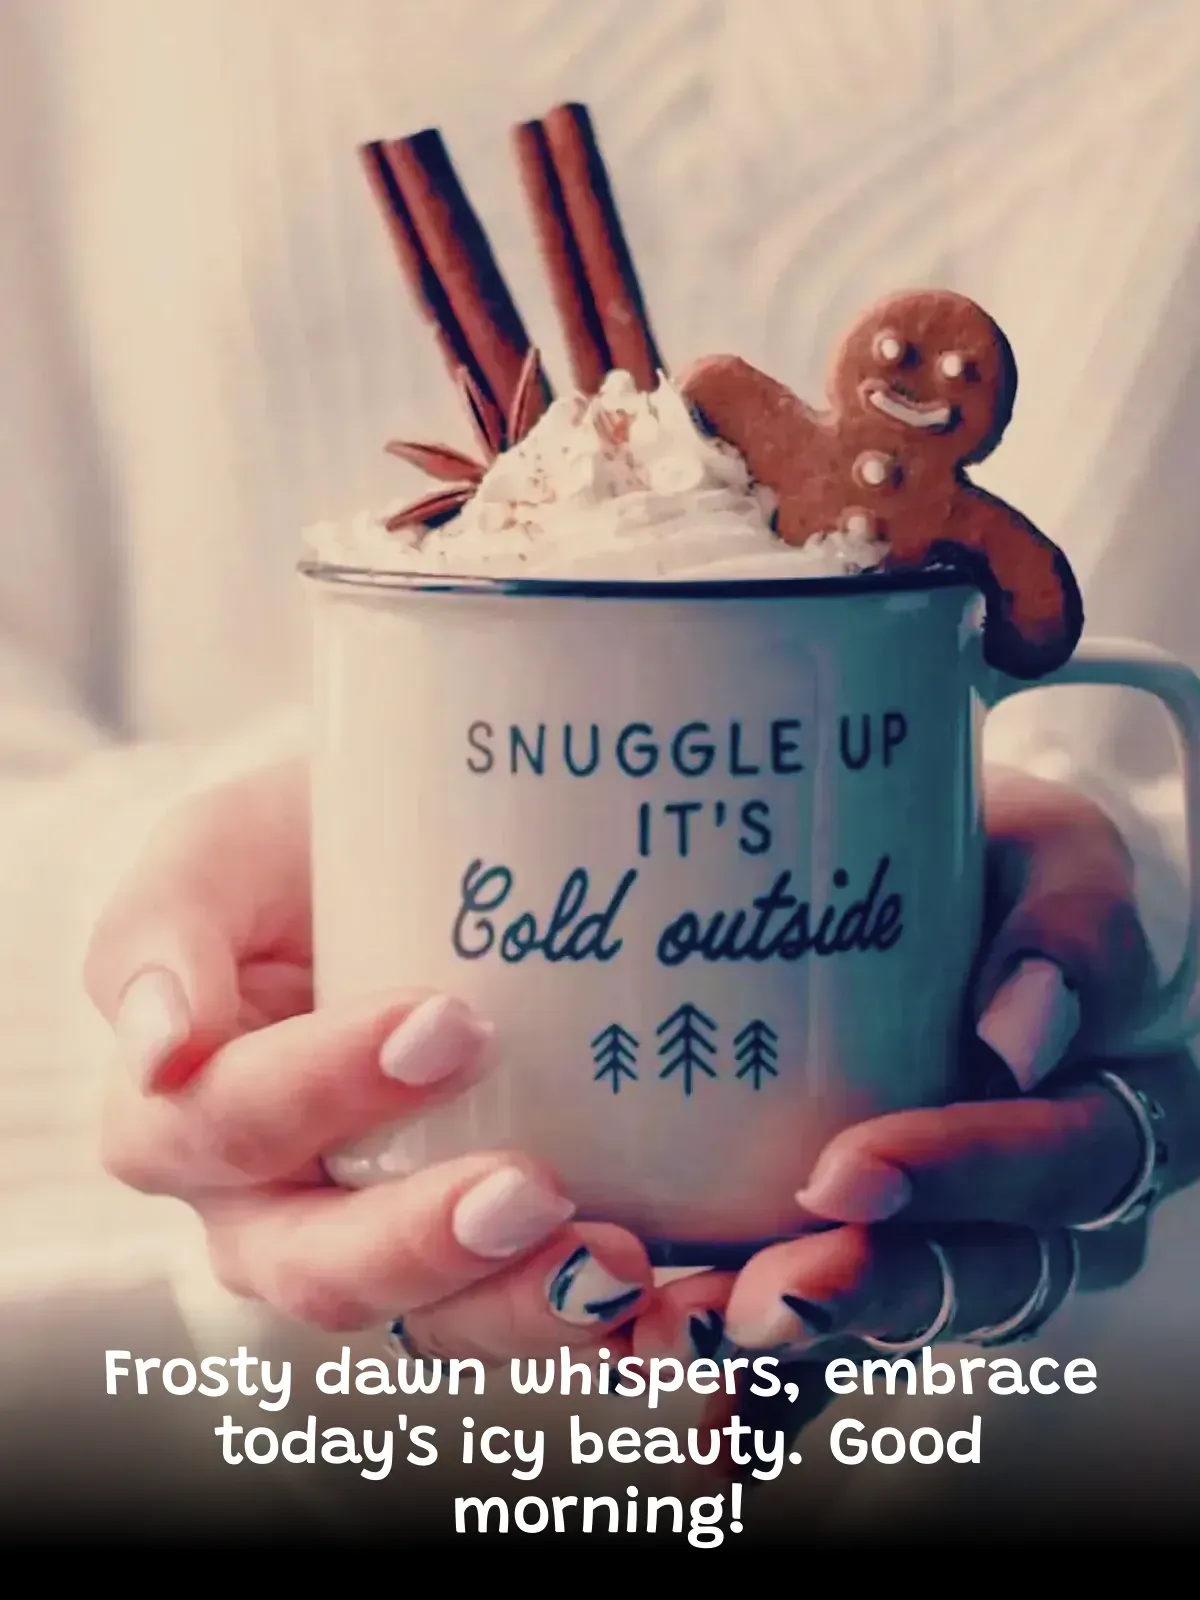 Cozy indoor scene with a person holding a mug of hot chocolate